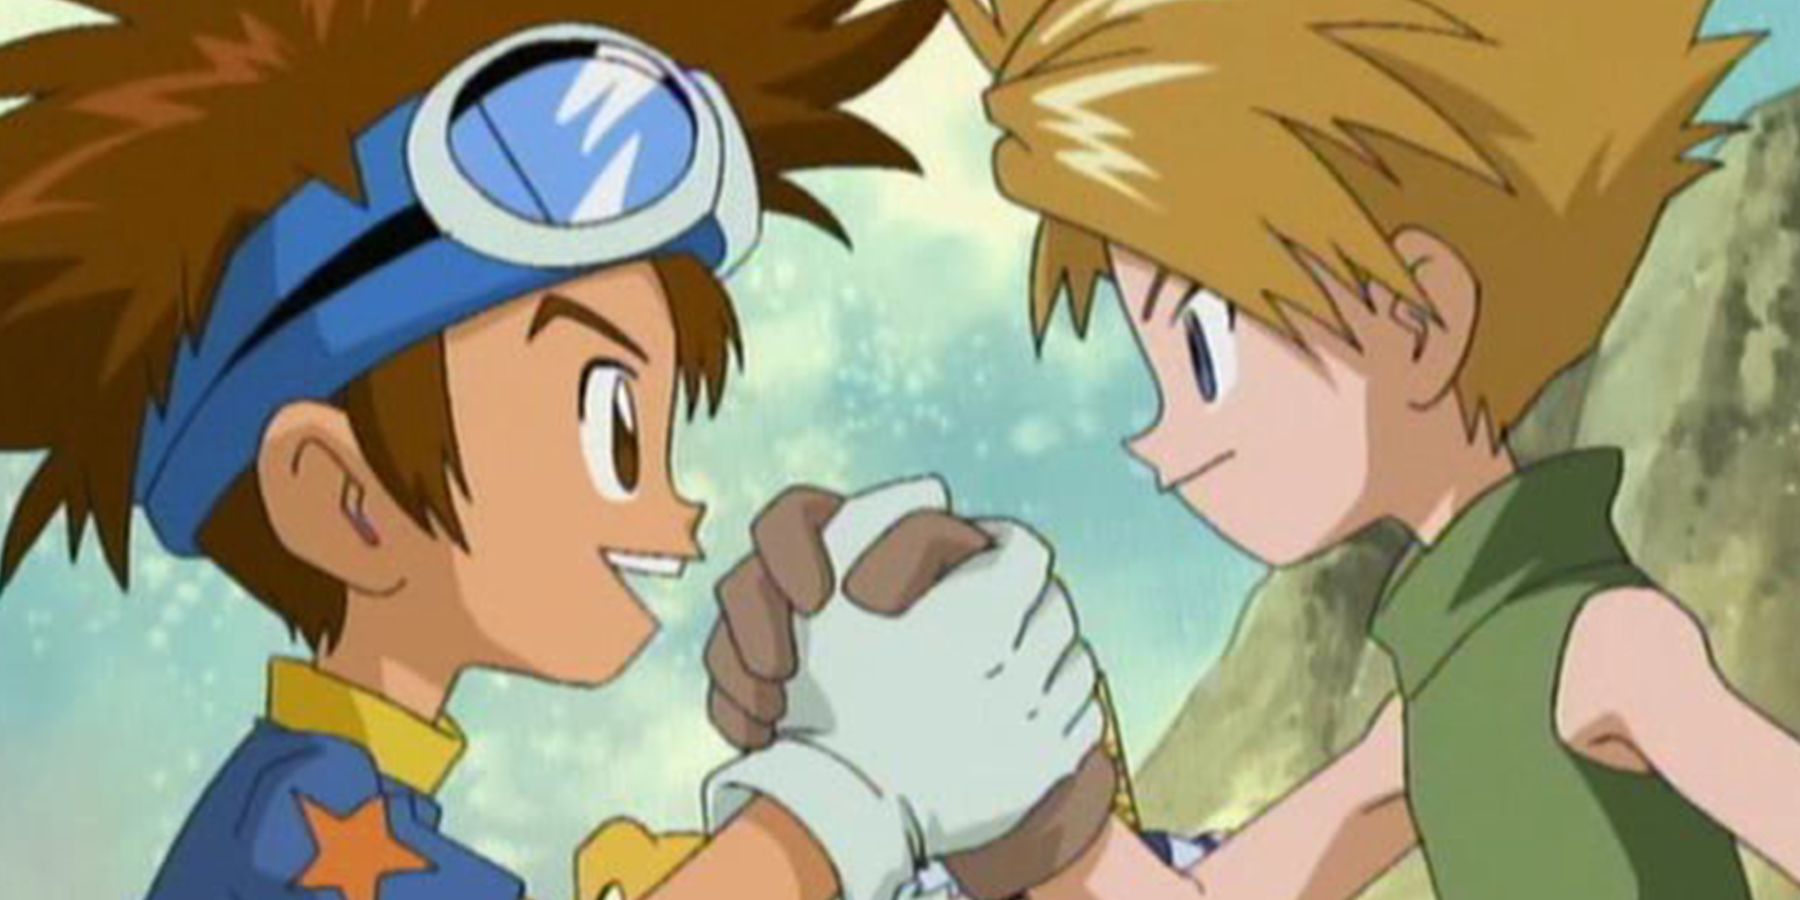 Tai, the protagonist of Digimon, and Matt, his rival, during the events of Digimon Adventure